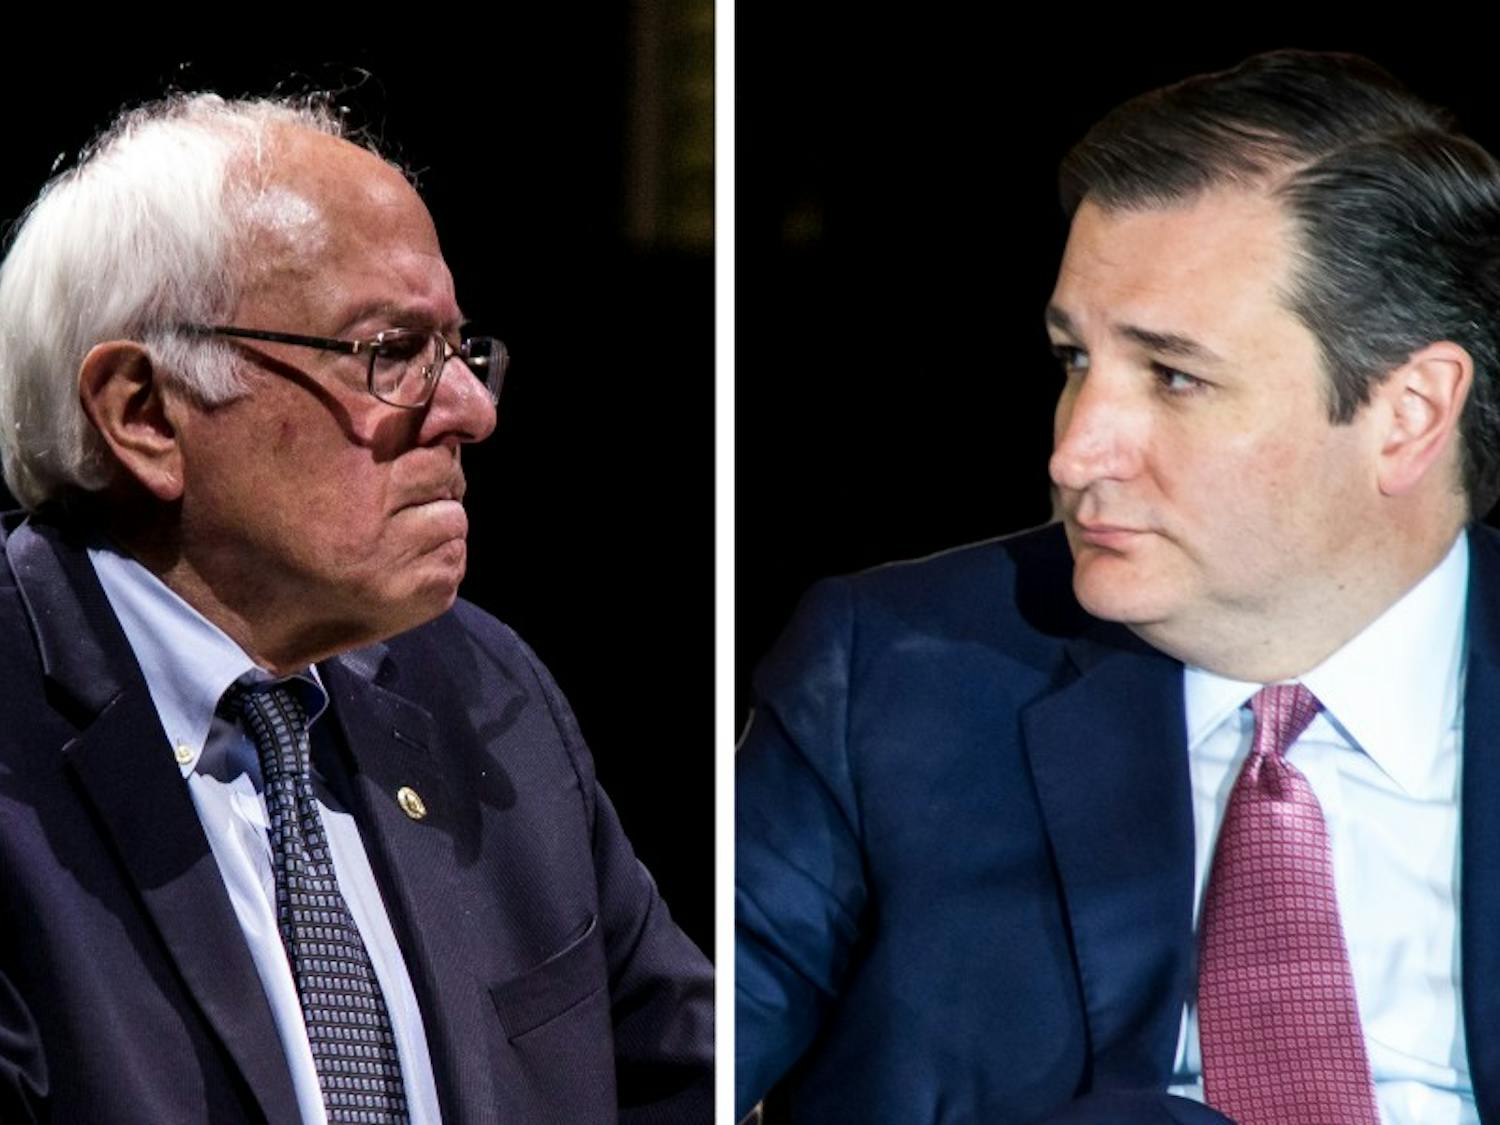 Upsets by Vermont Sen. Bernie Sanders and Texas Sen. Ted Cruz in the Wisconsin primaries could change Wisconsin’s traditional role in the primary process.